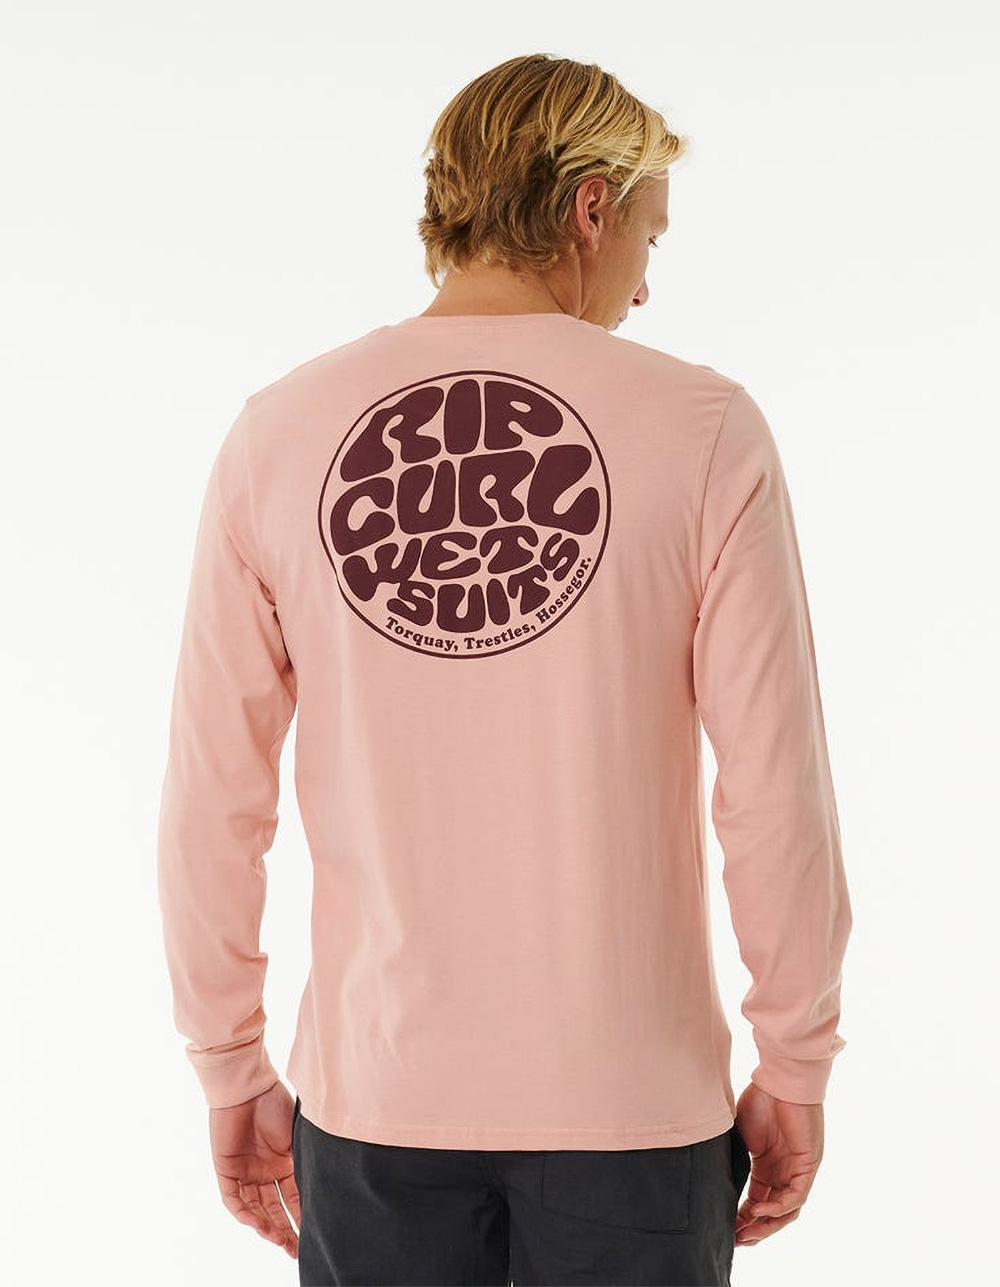 Rip Curl Wet Suits - STICKERS  Rip curl, Surfing, Graphic design company